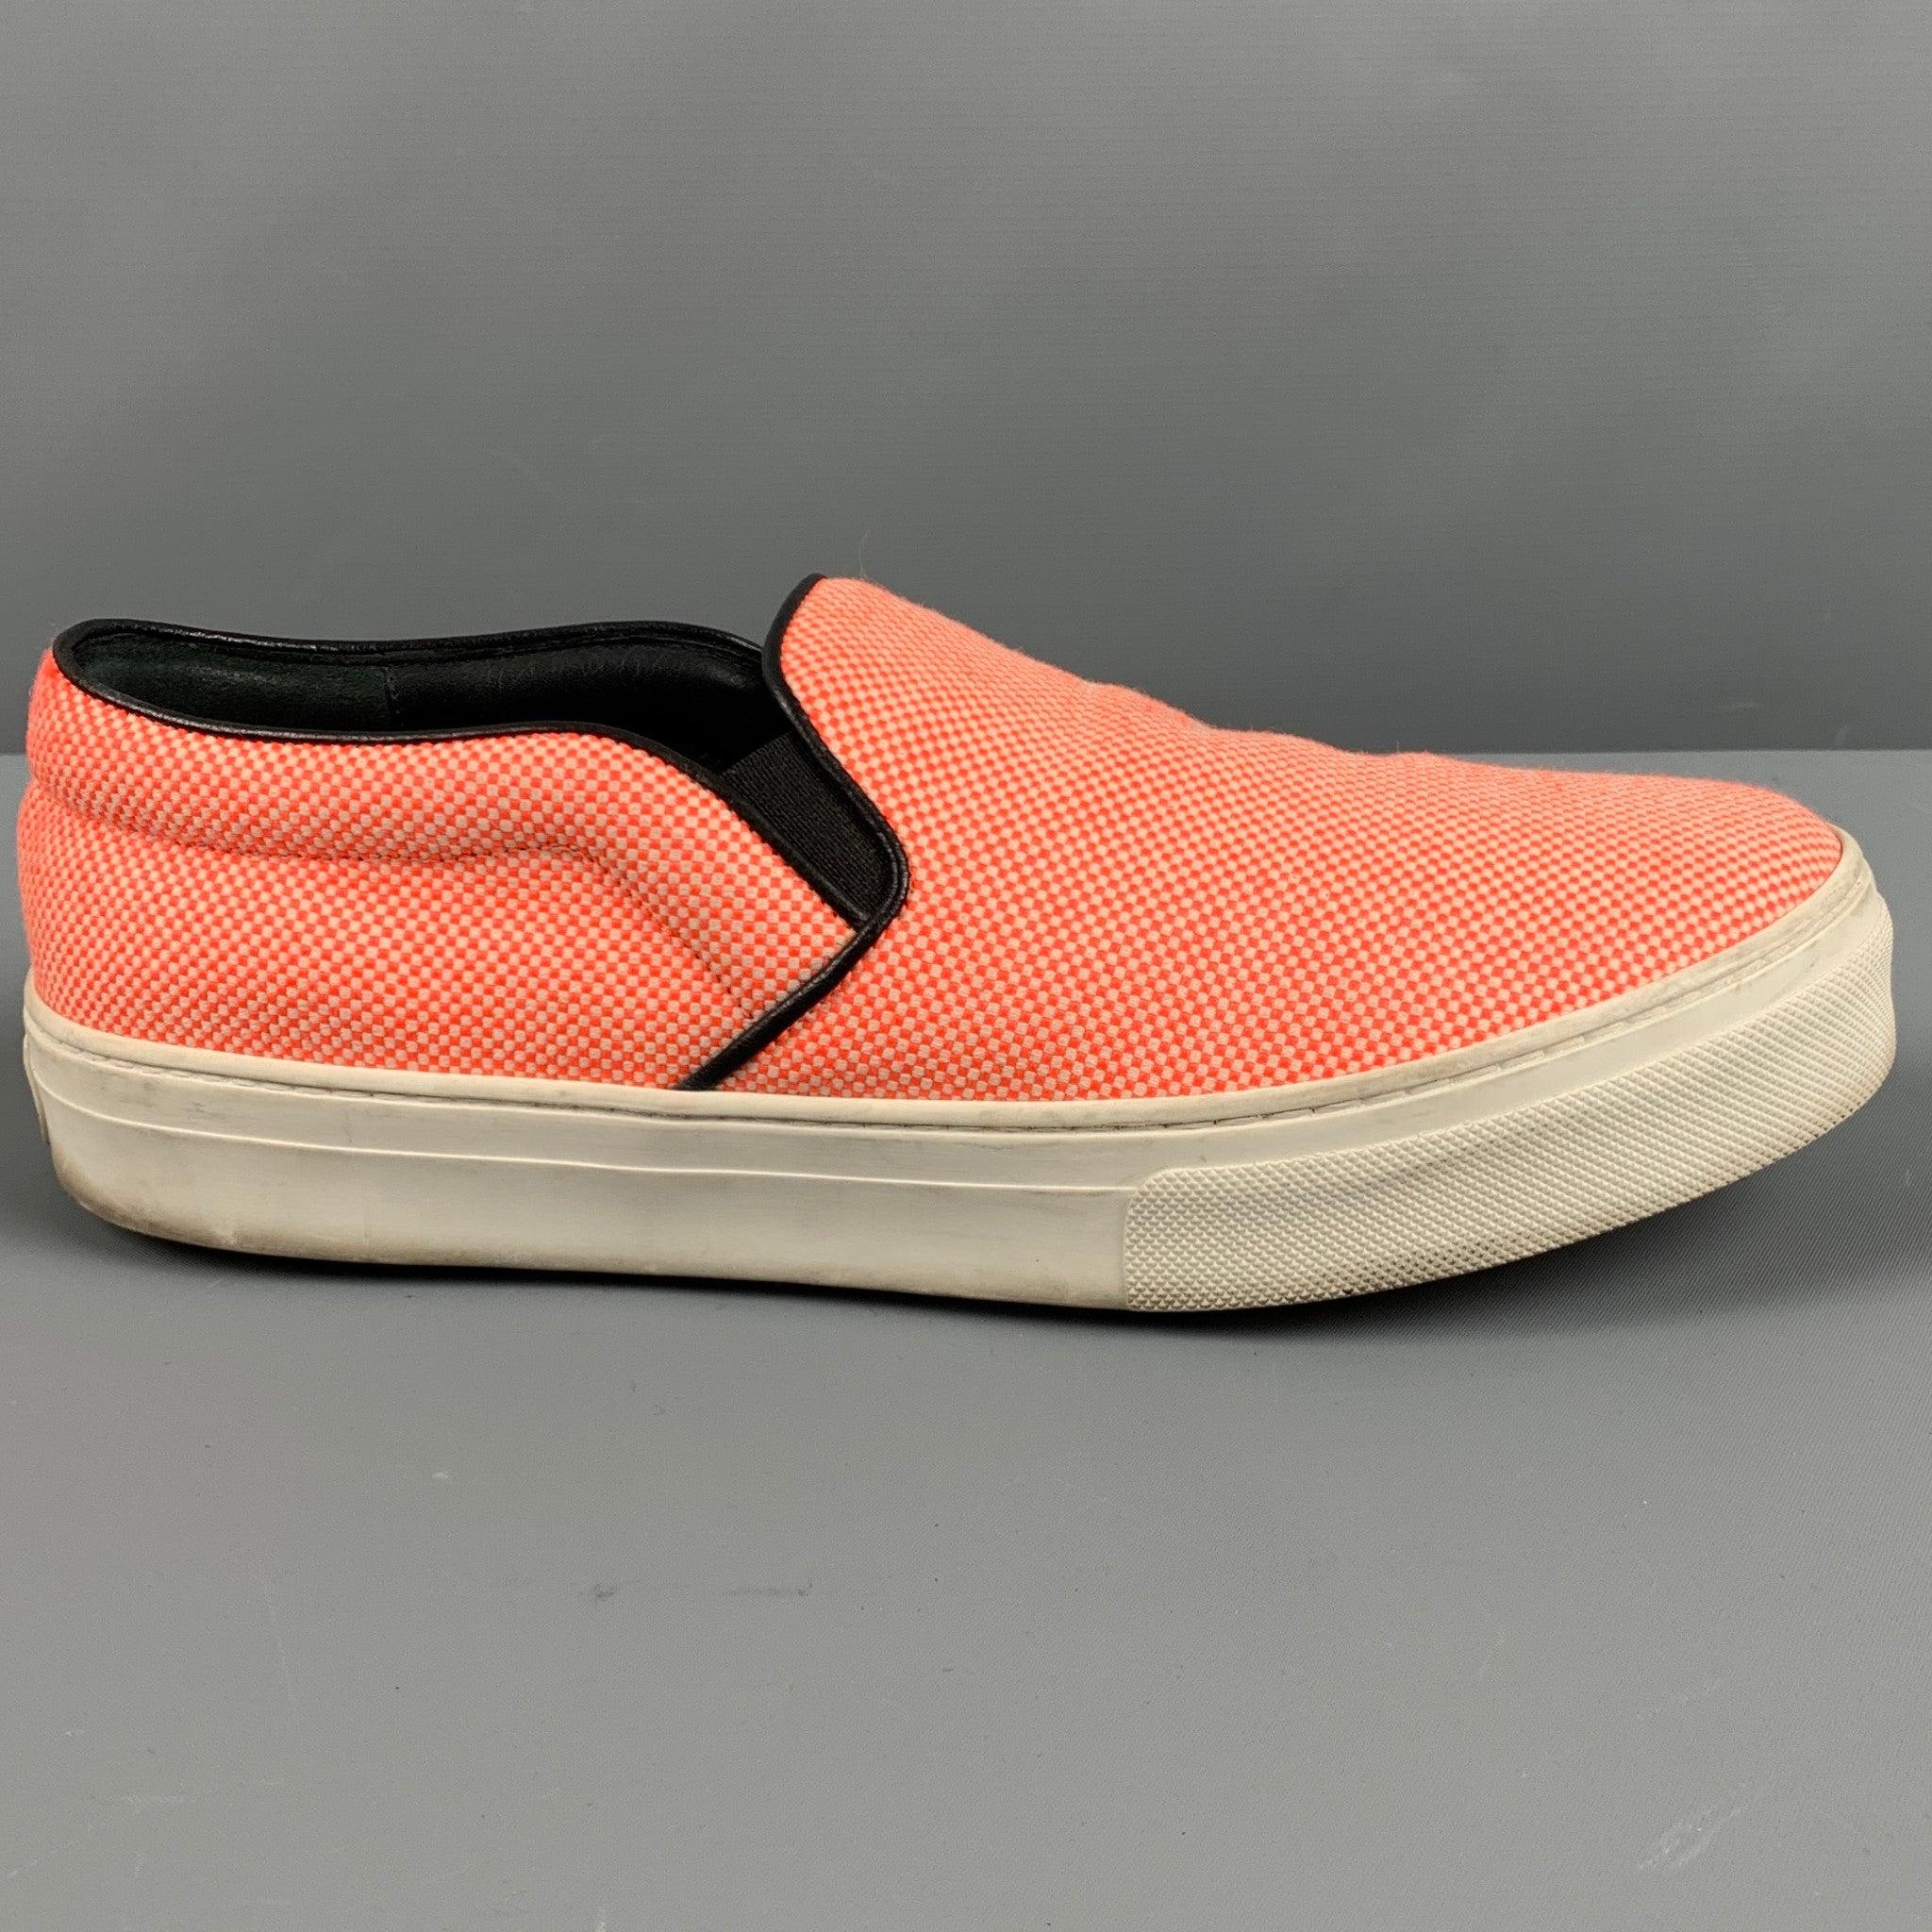 CELINE sneakers
in an orange and white fabric featuring nailhead pattern, slip on style, and rubber sole.
Made in Italy.Very Good Pre-Owned Condition. Moderate marks, as is. 

Marked:   38.5Outsole:10 inches  x 3.5 inches 
  
  
 
Reference: